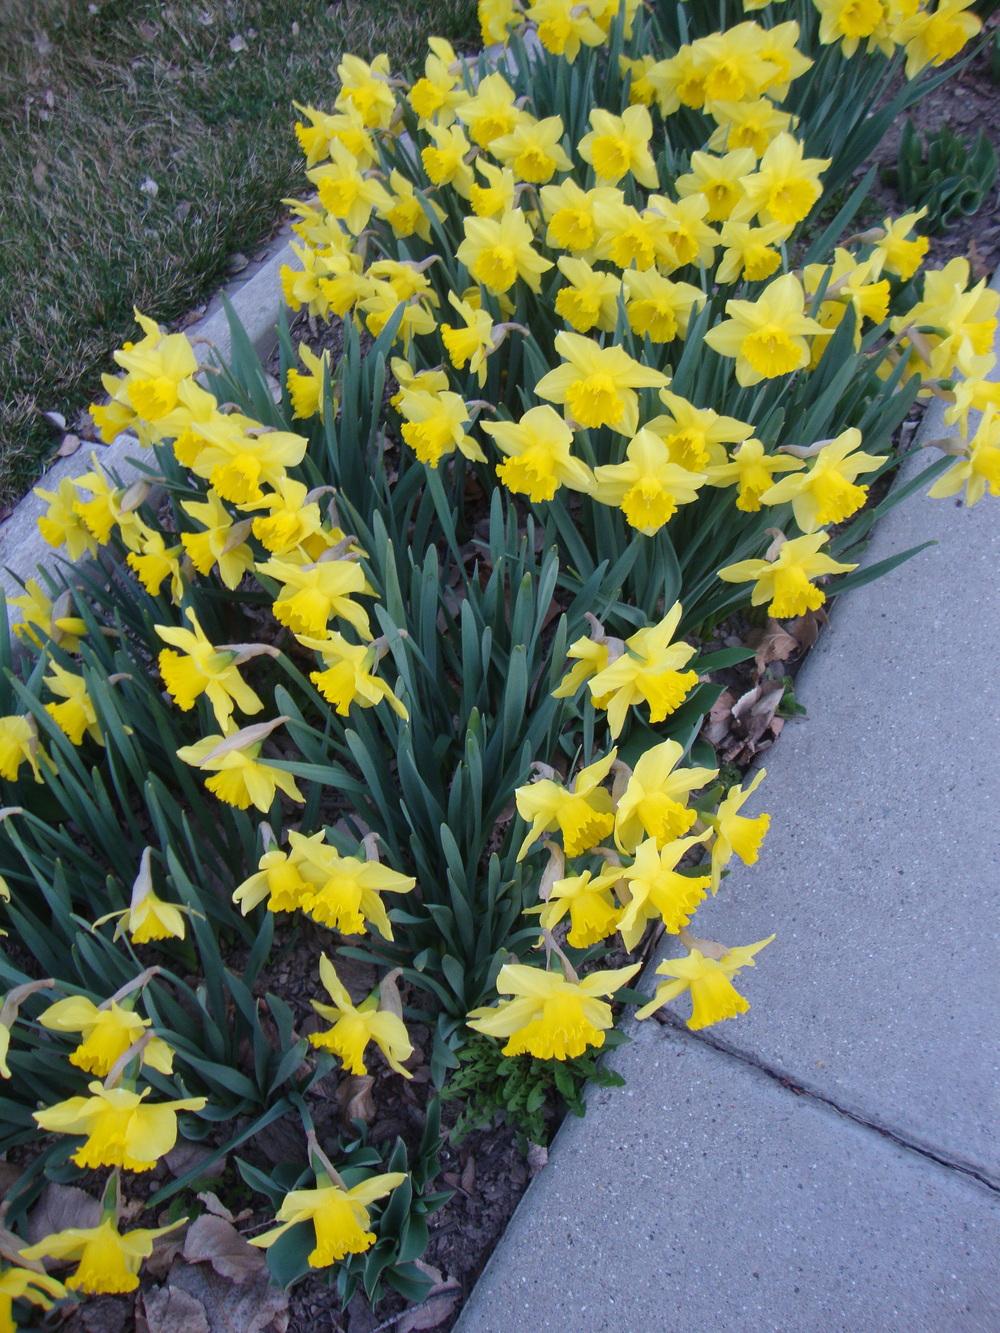 Photo of Daffodils (Narcissus) uploaded by Paul2032